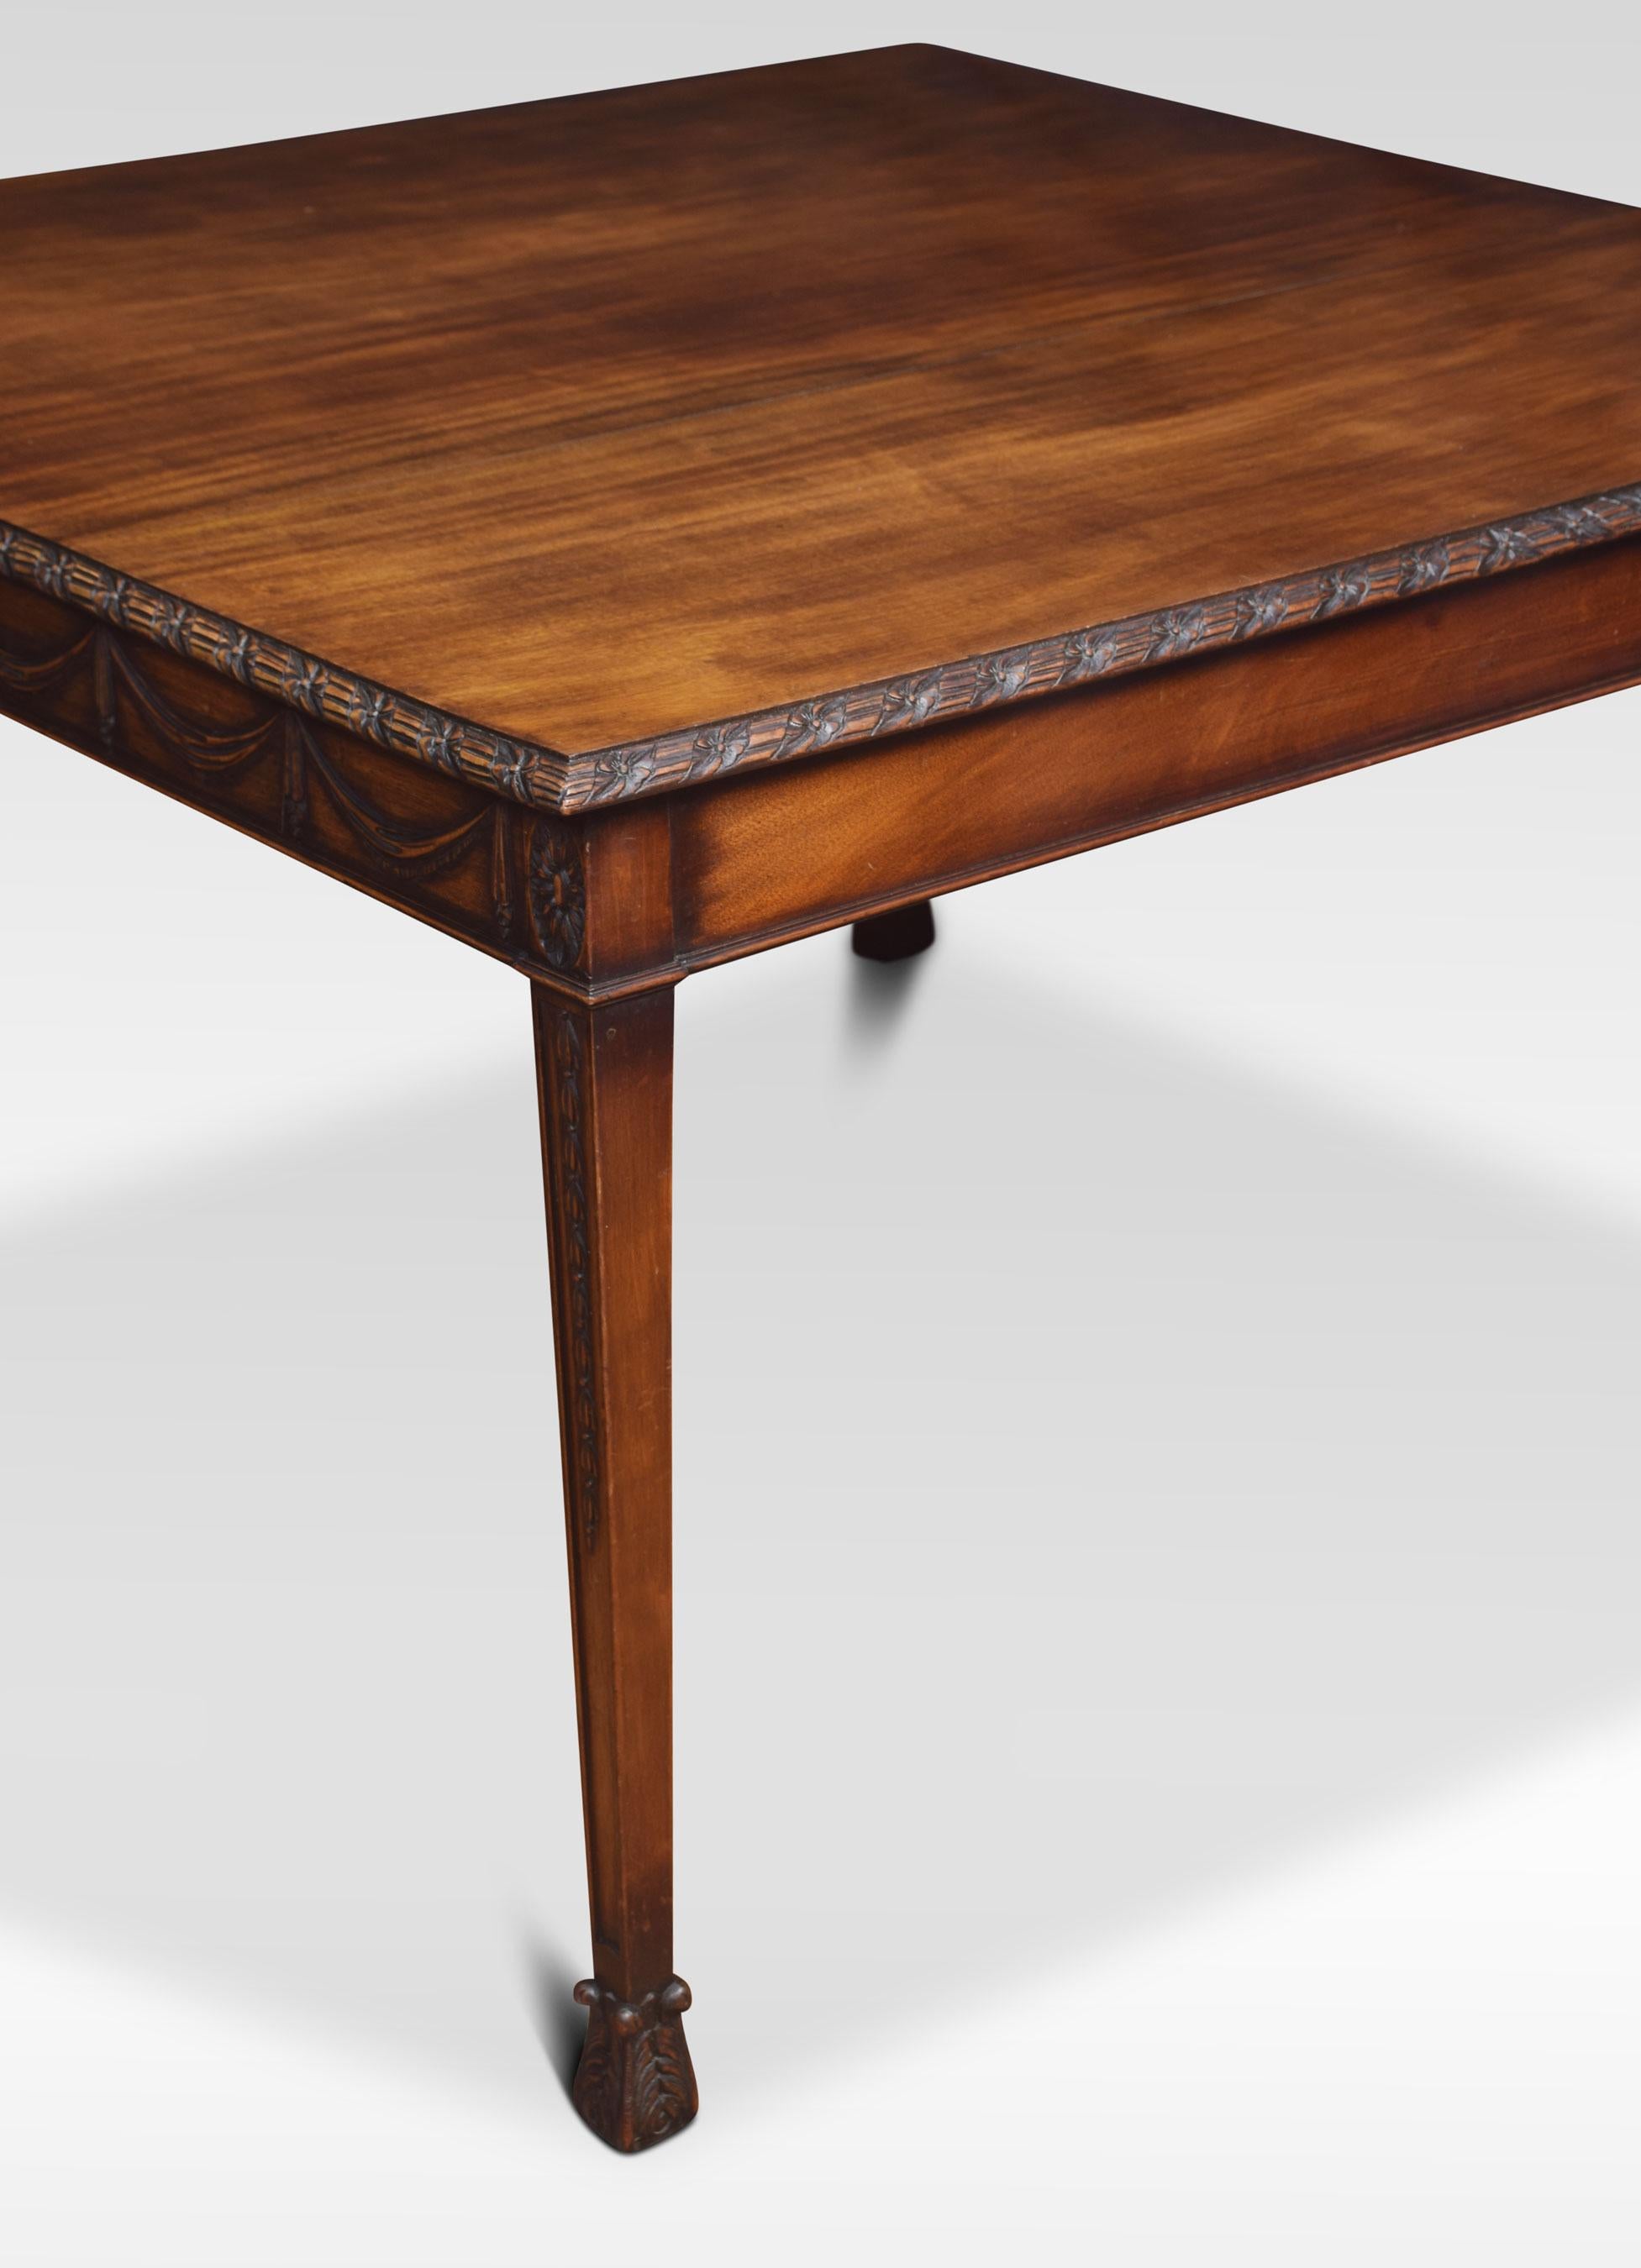 Adam Revival Mahogany Centre Table In Good Condition For Sale In Cheshire, GB